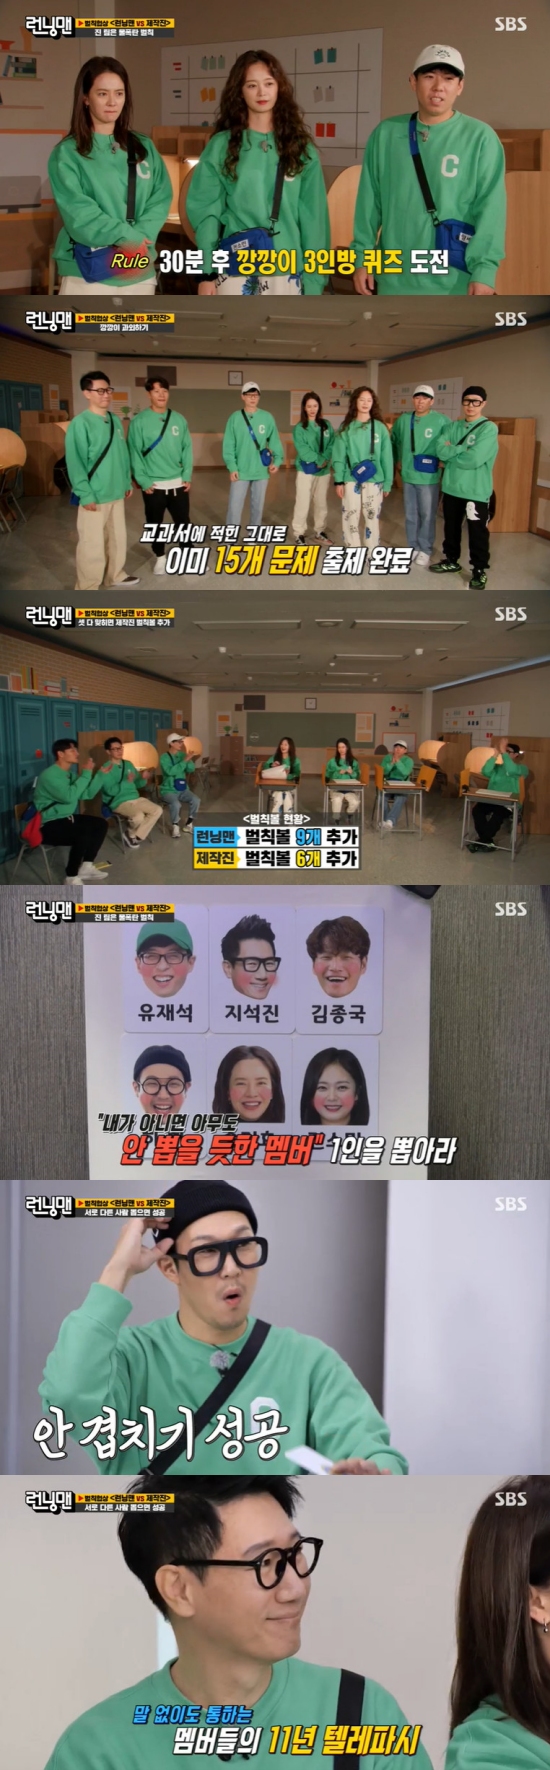 On SBS Running Man broadcasted on the 21st, 2021 Running Man Penalty Movie - The Negotation Race was decorated with the scene where Yoo Jae-suk, Ji Suk-jin, Kim Jong-kook, Haha, Song Ji-hyo, Jeon So-min and Yang Se-chan won the production team and the scene where they won the show. Im in.On the day, the production team asked, Running Man penalty, what do you think?Kim Jong-kook said, There is something we hate and what viewers want to see is different. Haha said, We know exactly what the production team hates.I was really annoyed by the book review. Kim Jong-kook said, We do not like to go late, and the members preferred penalties that ended in a short time.But Song Ji-hyo said, The cream is also Aiki.That night, the smell of shaving cream still smells, Yang Se-chan said, Did you get the key number? Song Ji-hyo said, I got it. I was so happy to wash it together. Jeon So-min expressed his sadness saying, Why do not you wash with me?Song Ji-hyo explained, Did not we wash a lot like this?Yoo Jae-Suk also said, If the penalty is too strong, the players are obsessed with the game rather than fun to get the penalty.If the penalty is too weak, I would like to do this, Kim Jong-kook said. I was worried that the penalty would be too weak.Yoo Jae-Suk said, It will be a lot harder because of the doping in sport, but do not listen to this story badly and it is Kim Jong-kook who responds first when the penalty is always increased.The crew then conducted the 2021 Running Man Penalty Movie - The Negotiation Race, and said, Today we will share penalties according to the results of the mission.The team that won the last time is losing, and if you win, the production team leader will be hit by a water bomb, and you will be penalized every week from next weeks recording to the last recording of the year.If we win, we will hit a water bomb and try to do what we want to do by the end of the year. The members performed a mission to set the number of basic penalties; the members did not receive basic penalties for their extraordinary teamwork, and the crew had two basic penalties.The crew then asked who the most common sense members were, and Yoo Jae-Suk, Ji Suk-jin and Kim Jong-kook were named.The production team asked, Who is Ace among the remaining four? The members gathered their mouths and pointed to Haha.The production team held a quiz for Song Ji-hyo, Yang Se-chan and Jeon So-min, and said, It is a Running Man scholarship quiz that can increase the number of penalties for the crew only if the gangsters show their skills.The three of you picks up the quiz, with the crew penalty ball added as many times as they hit, and the Running Man penalty ball added as many times as they miss.Haha Chance, the Ace, appears three times. If you listen to the keyword and ask for Haha Chance, you will write a chance and certify it as a hit if you hit yourself. Furthermore, the production team added, It would be too hard to solve the quiz, but for 30 minutes, three of them (Yoo Jae-Suk, Ji Suk-jin, and Kim Jong-kook) will become tutors one-on-one.The first mission result was that the crew added six penalty balls and the Running Man team added nine penalty balls.The production team said of the second mission, I will check how well your telepathy works.If you do not think I will pick anyone else, he said. The actual members selected one different member except Haha and Ji Suk-jin and received one penalty ball.The members admired themselves, and Haha was thrilled that it was teamwork art.The final mission featured a variety of athletic events, including table tennis, badminton and foot volleyball; the third round was also won by the Running Man team, and the crew lost with a 65 percent chance of penalty balls.The crew was hit by a 500kg water bomb.Photo = SBS broadcast screen